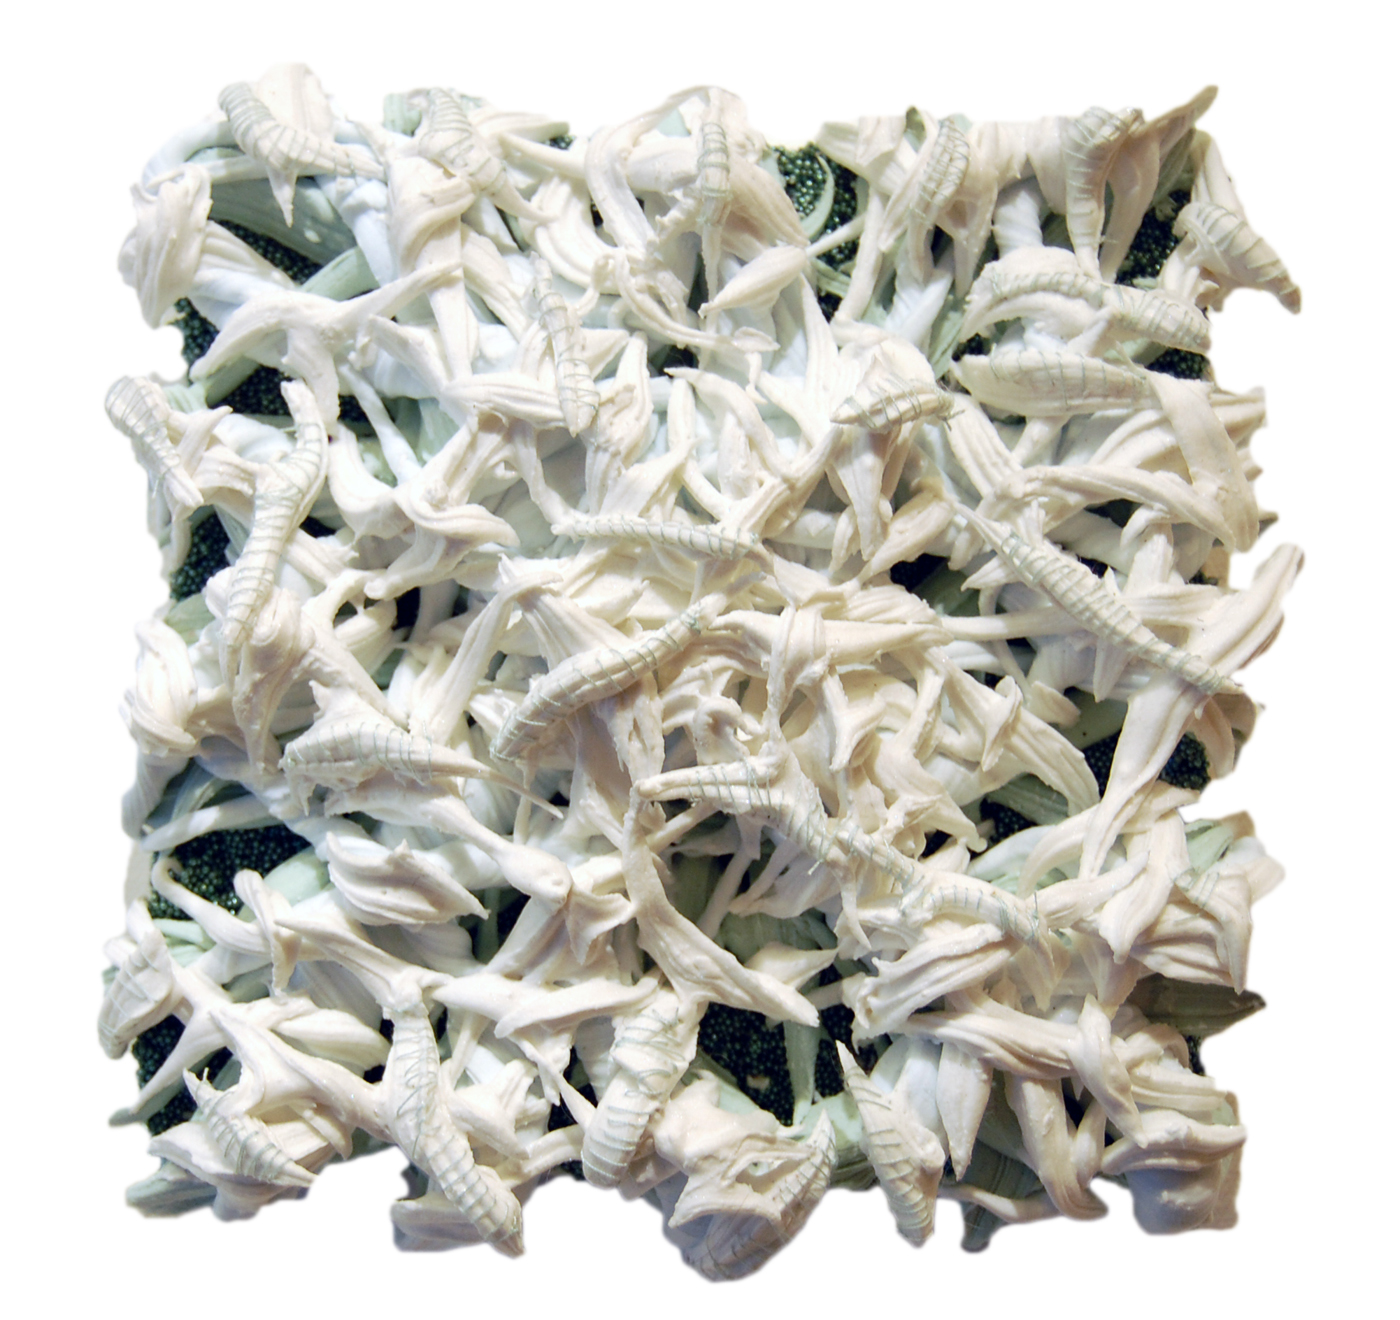 Pearl, 2013, Ultralight, pigment dispersions, glass beads and thread on canvas, 6 x 6 inches